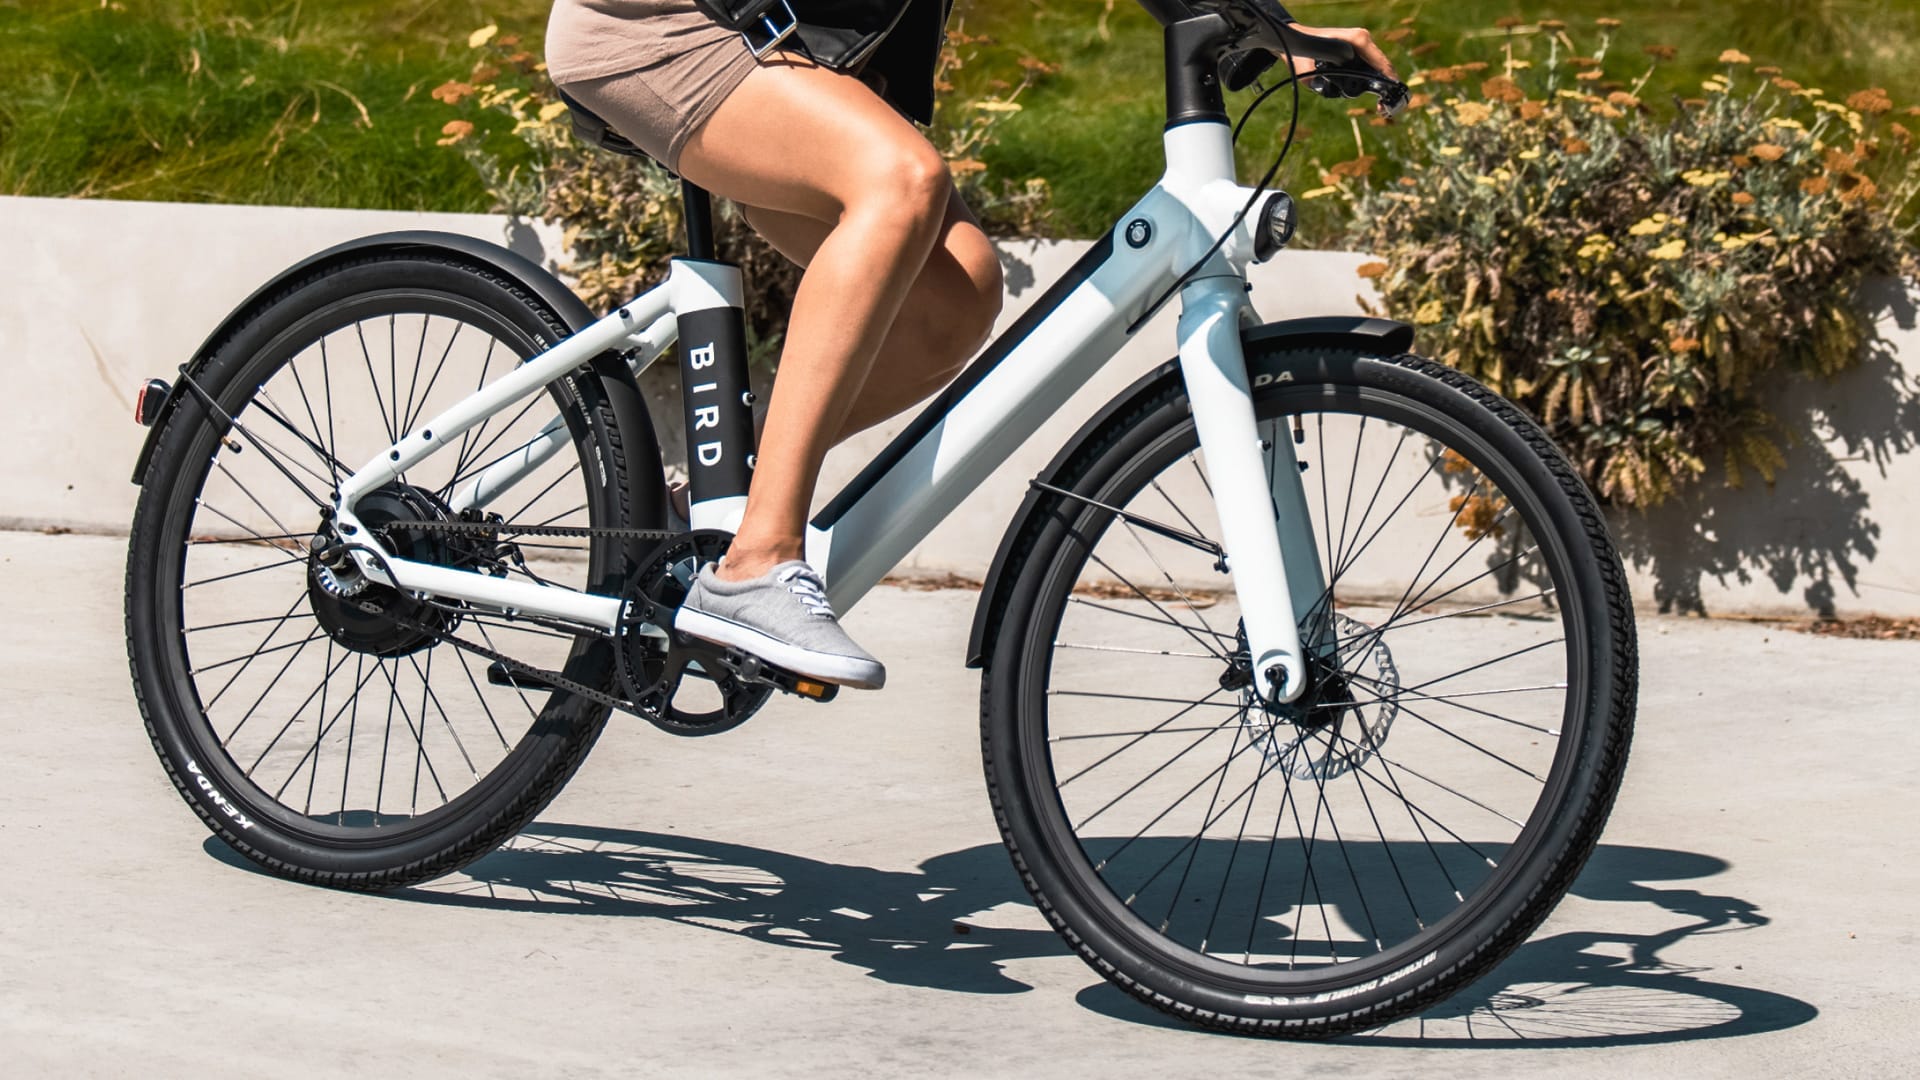 Bird doubles down on its e-bike expansion with a new bike you can buy